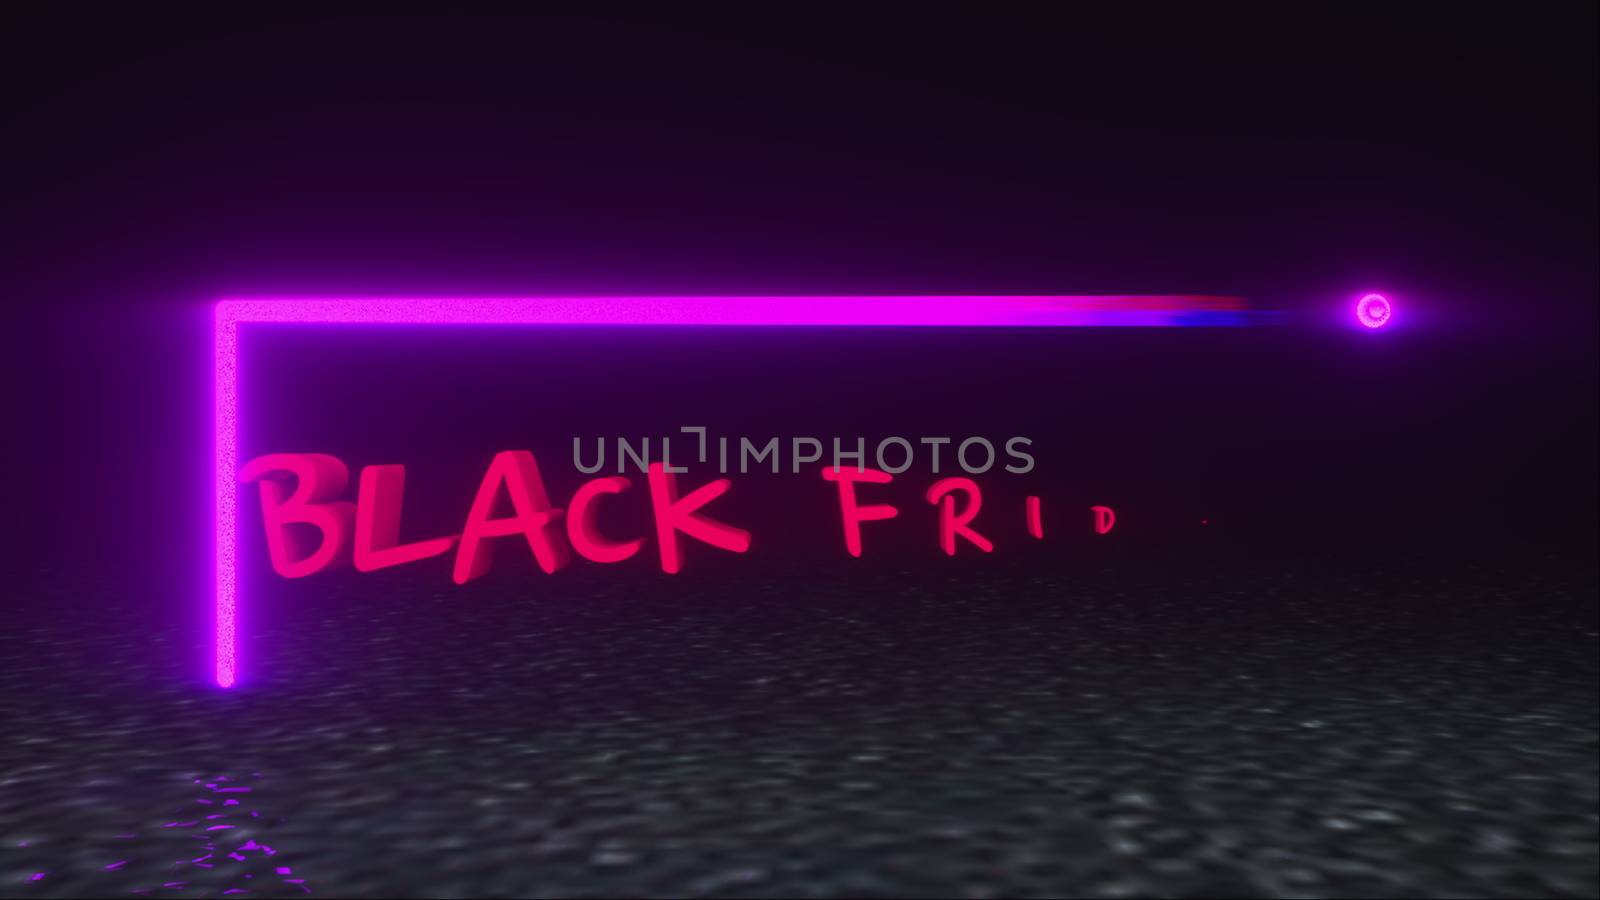 Computer generated background with neon light banner black friday. 3d rendering of a glowing neon text frame. Swivel advertising plate